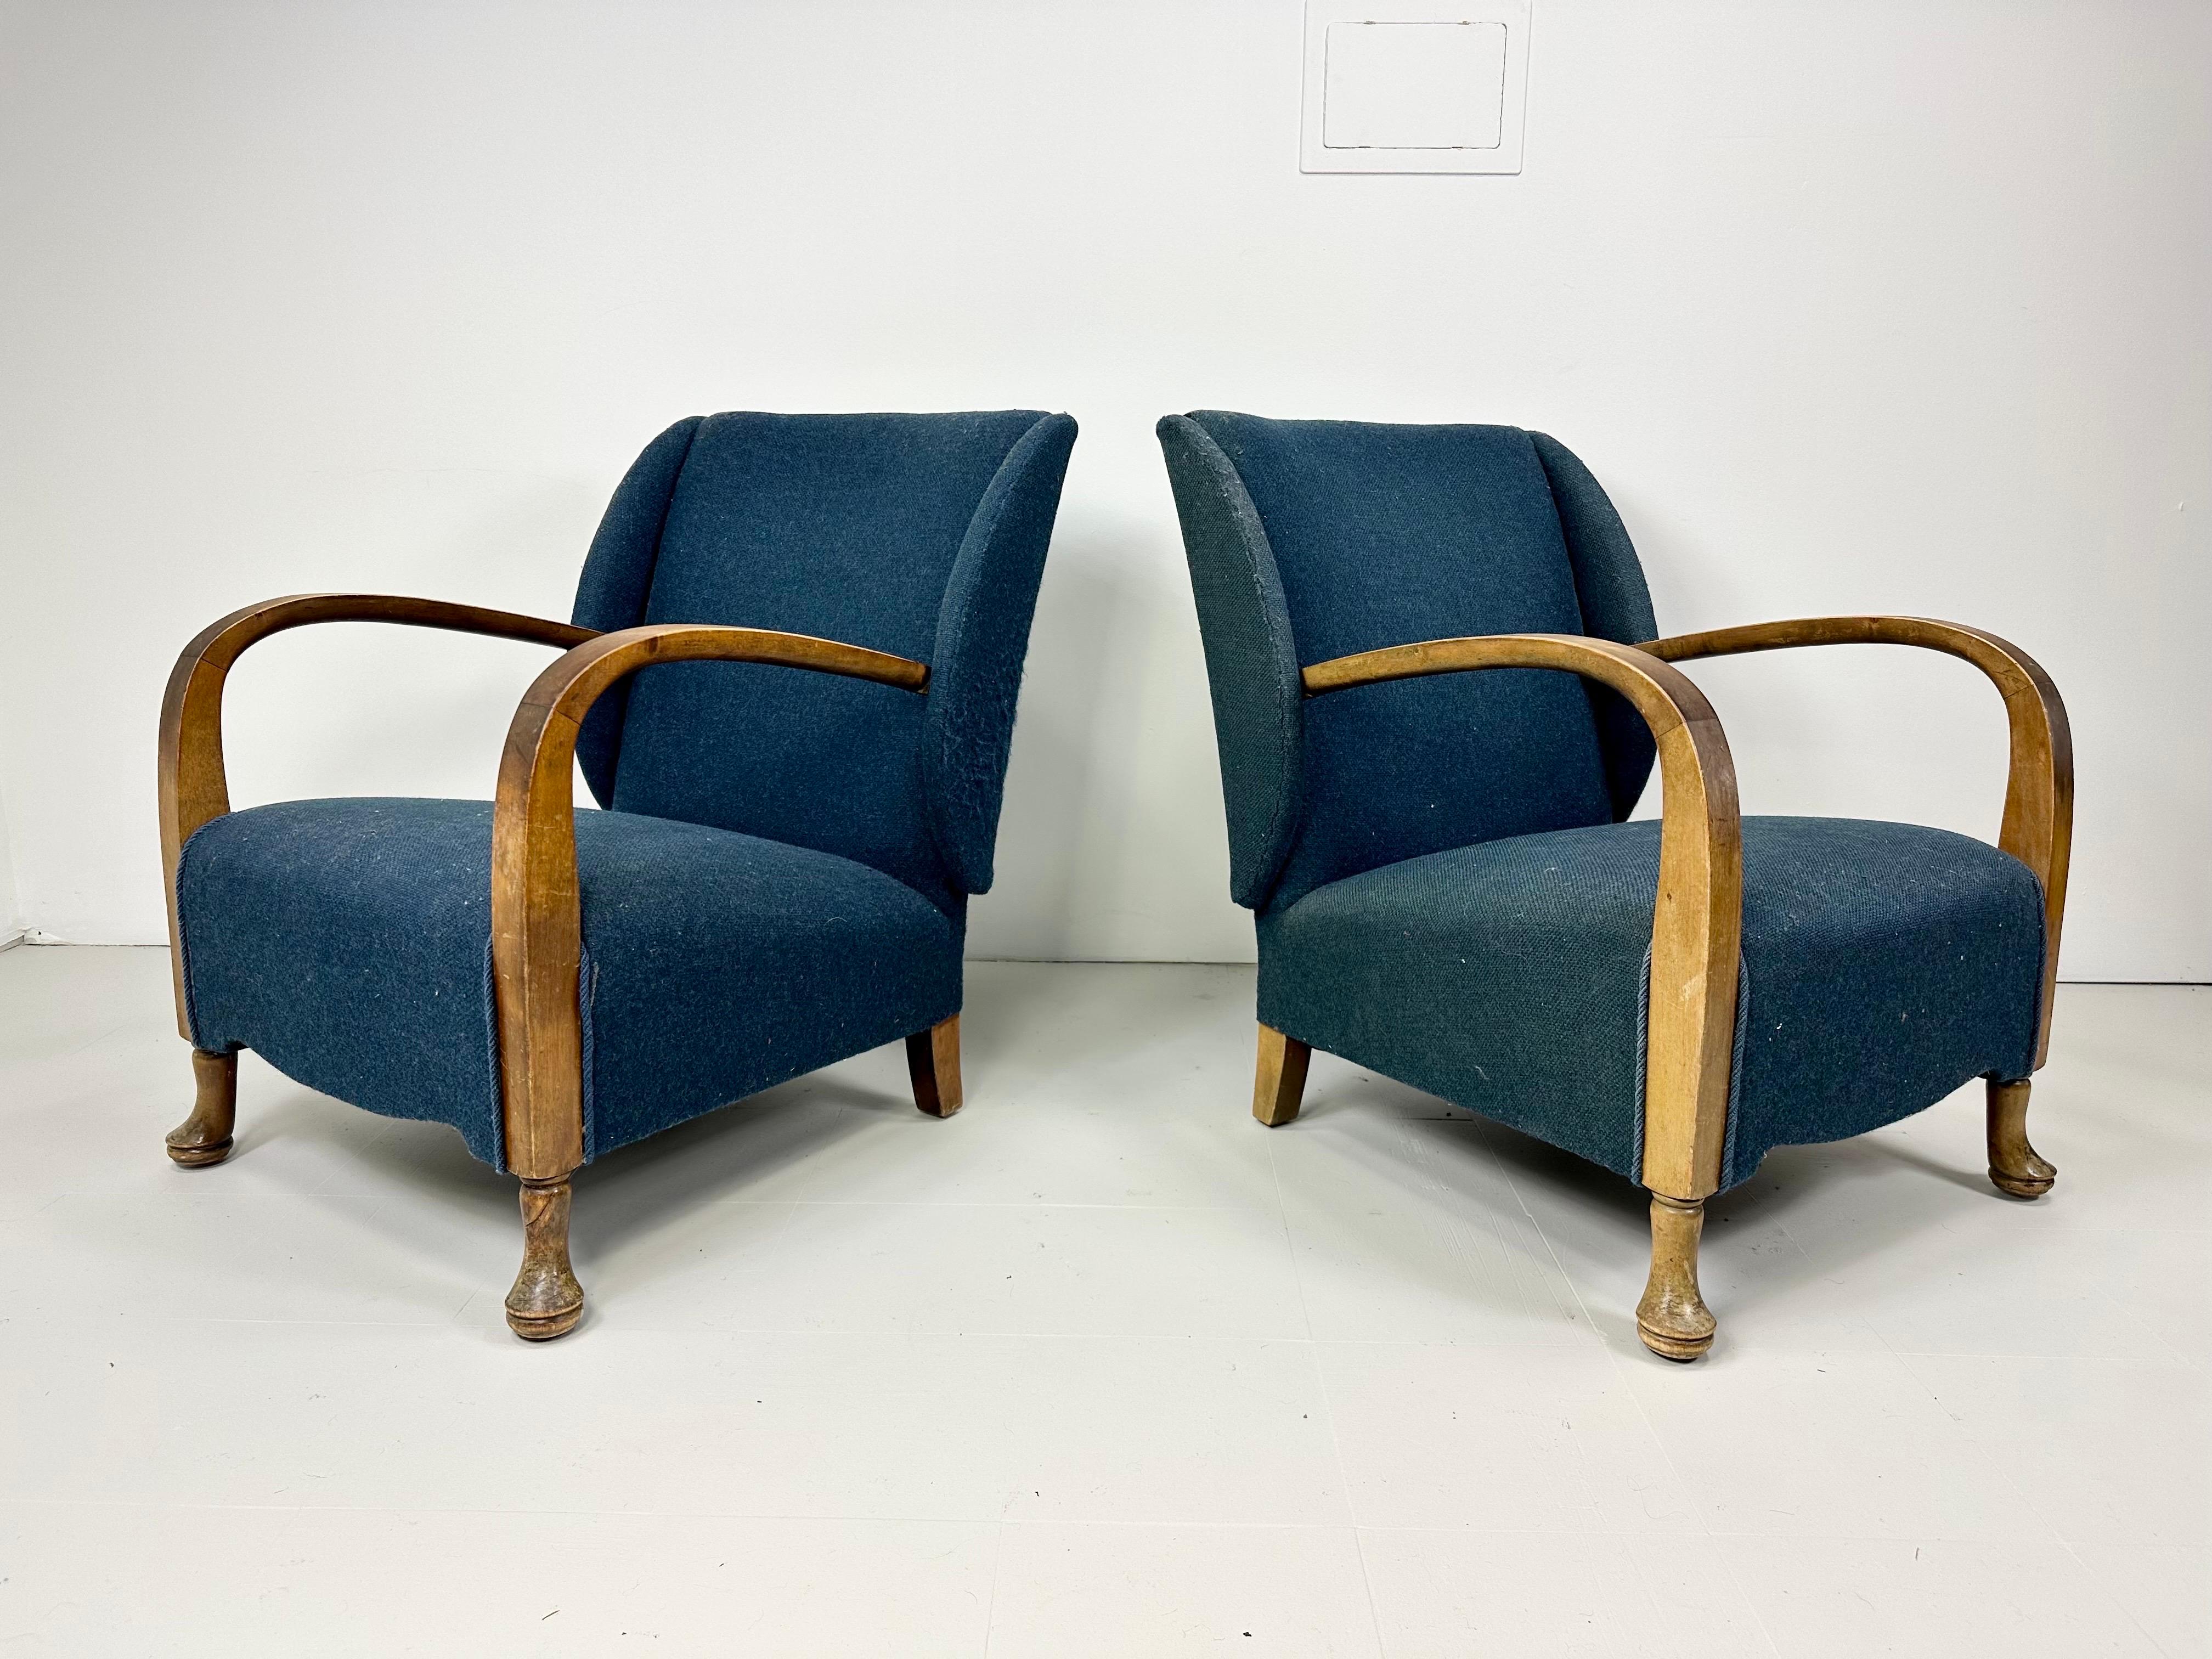 Pair of 1940’s Danish Lounge Chairs. Beech Frames, original wool upholstery. Well made Danish cabinetmaker chairs.

Delivery to NYC area available for $399.  Please inquire.